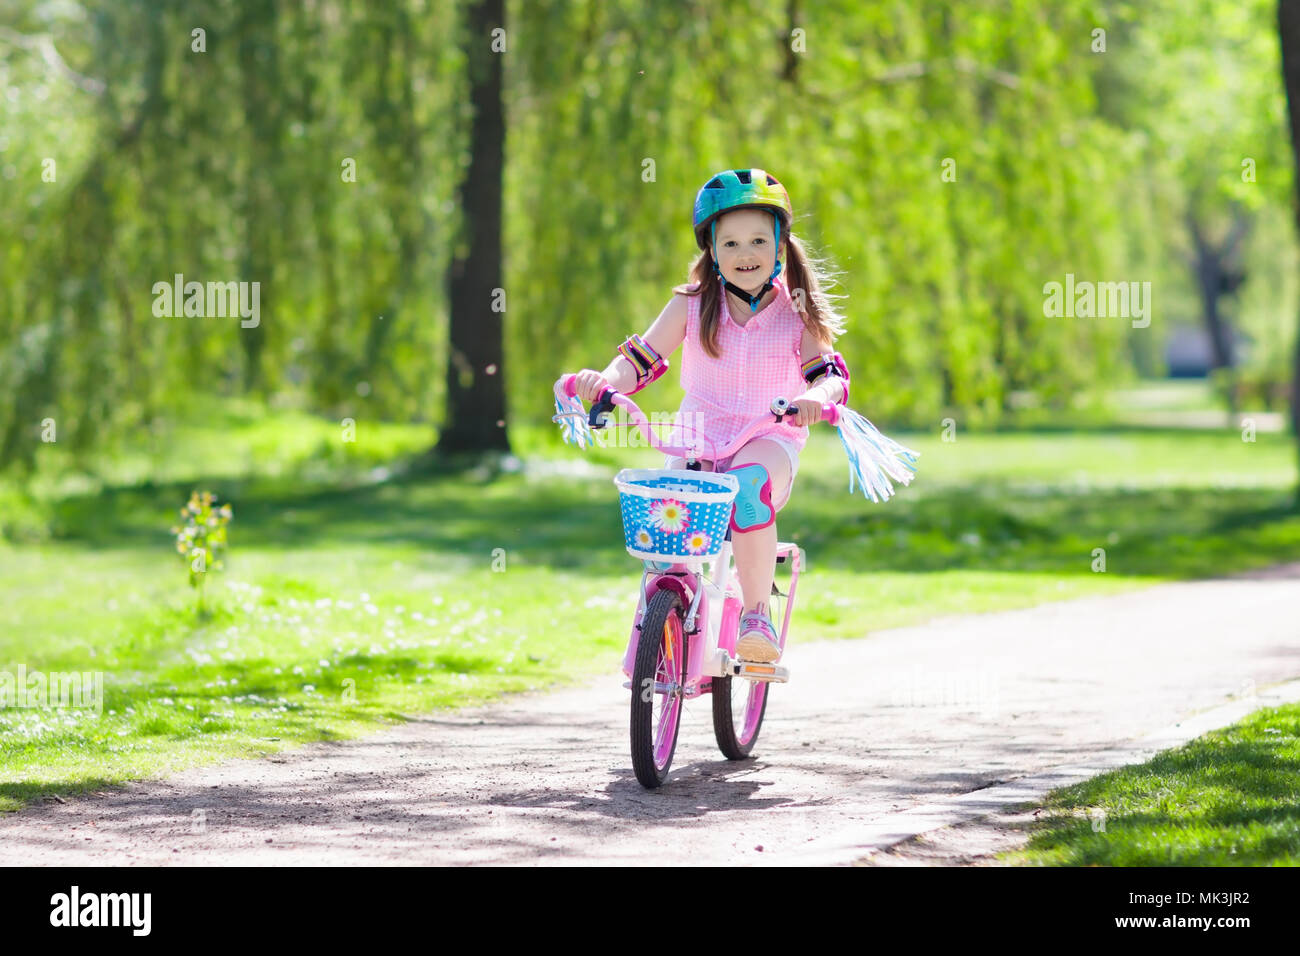 how to ride without training wheels